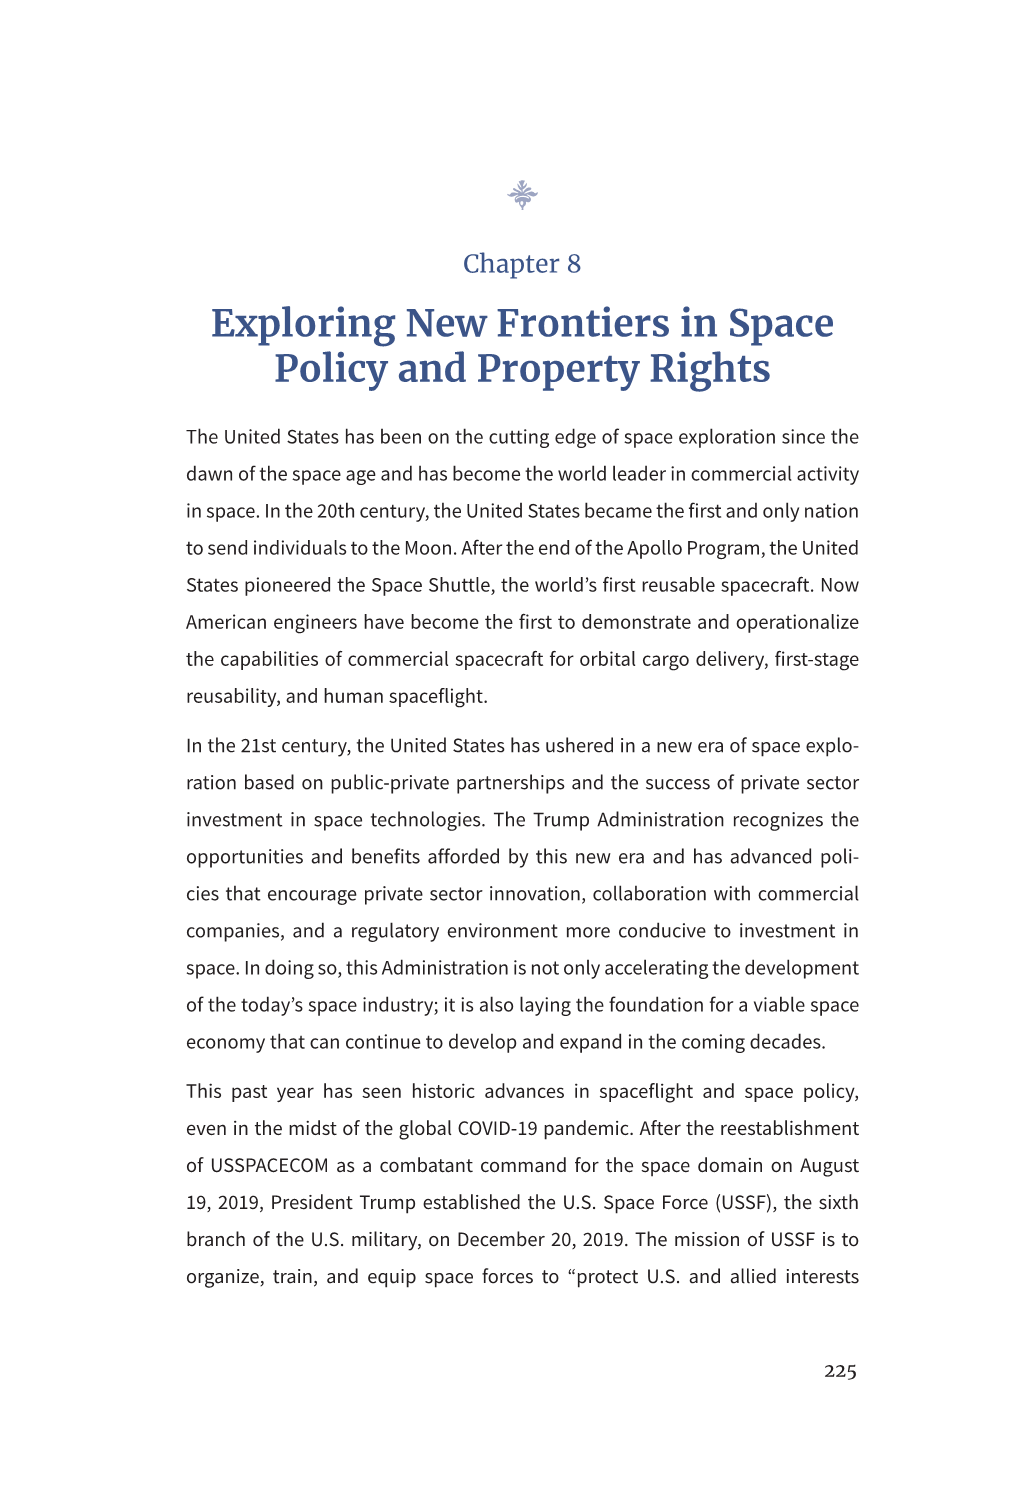 Exploring New Frontiers in Space Policy and Property Rights